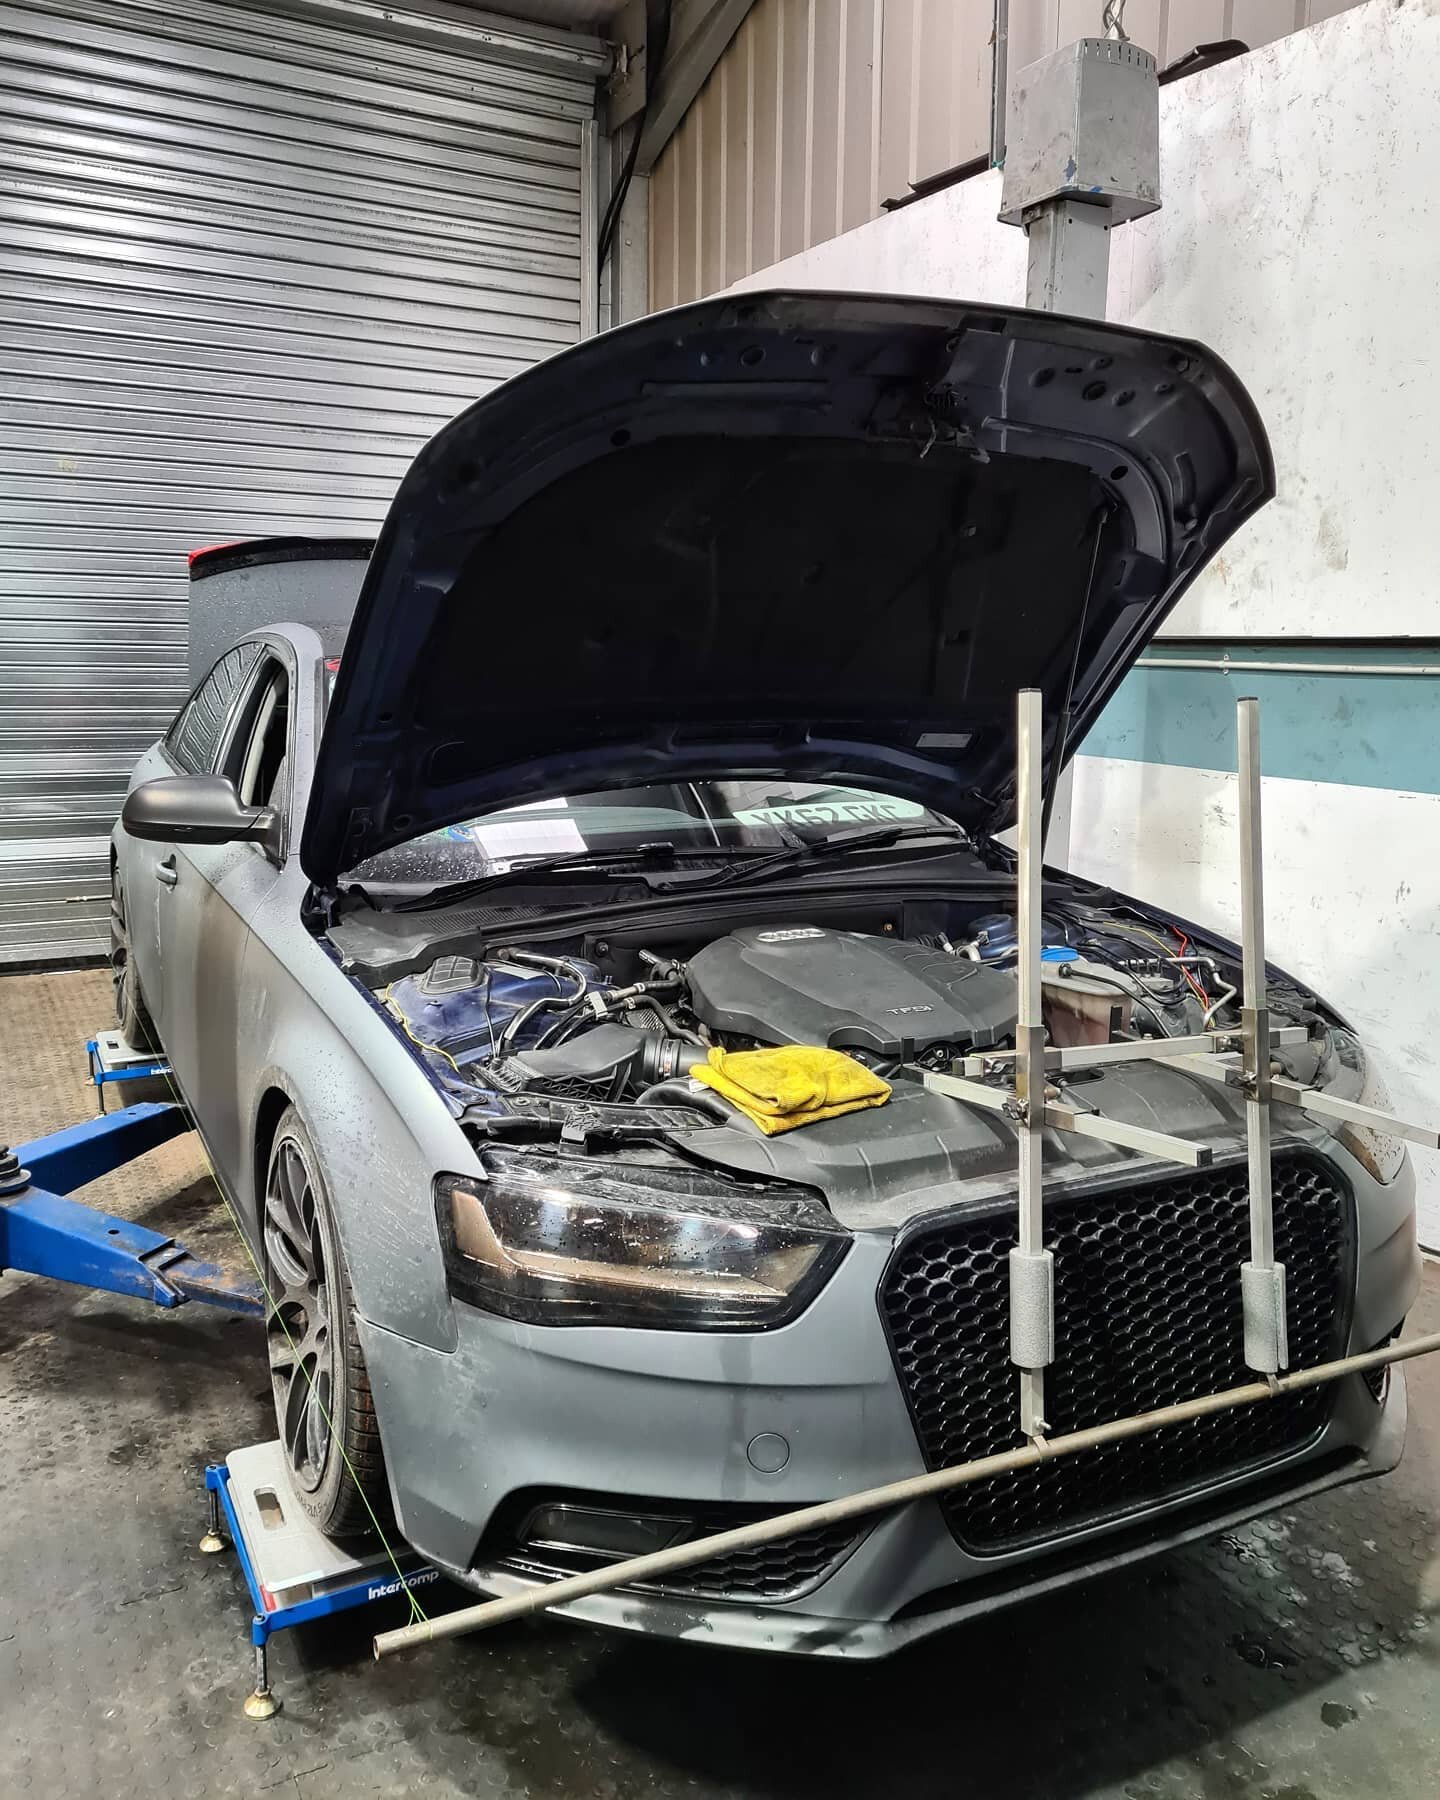 We'll finished the grey theme with this Audi A4 in for some alignment tweaks! 

Not very adjustable these out the factory, but for getting it pointing straight and turning in well what you've got it's enough! 

#audiA4 #modifiedcars #daily #audi #aud